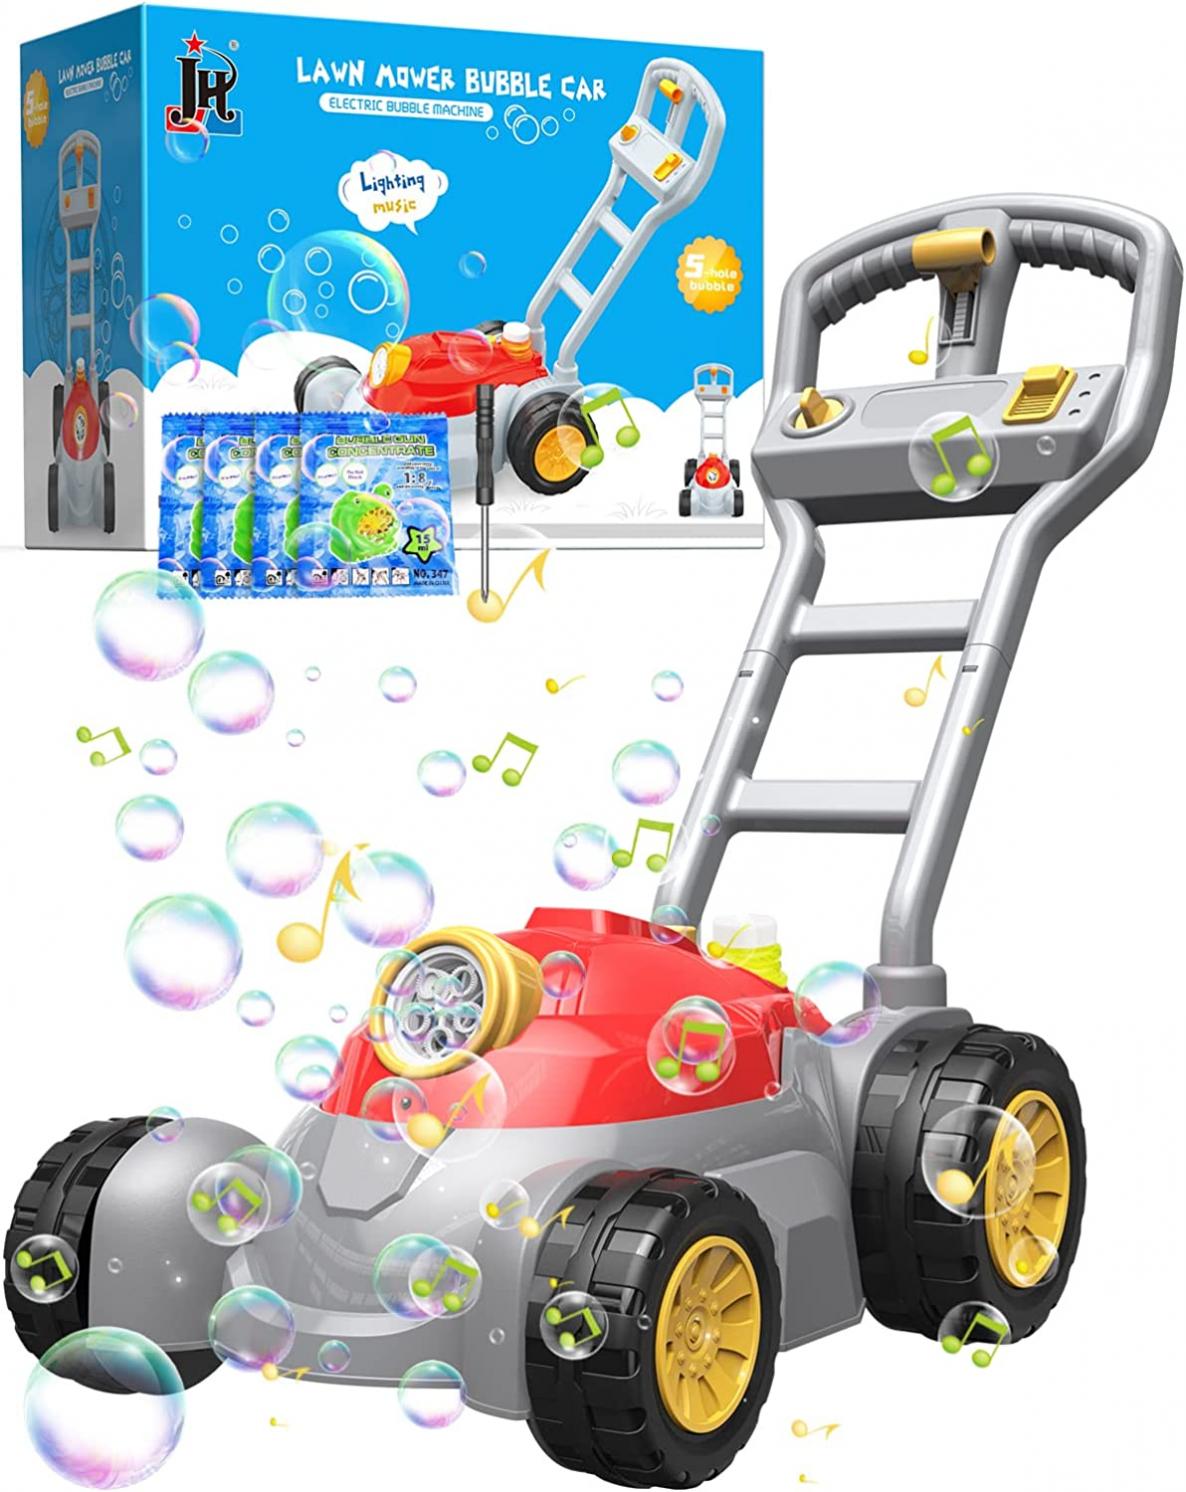 (Upgraded) Bubble Lawn Mower, BEYYON Red Lawn Mower Bubble Machine for Kids,Bubble Machine for Toddlers 3-6 Outdoor,Gardening Push Lawn Mower Toys Gifts for Preschool Kids Boys, Girls(Multicolored)